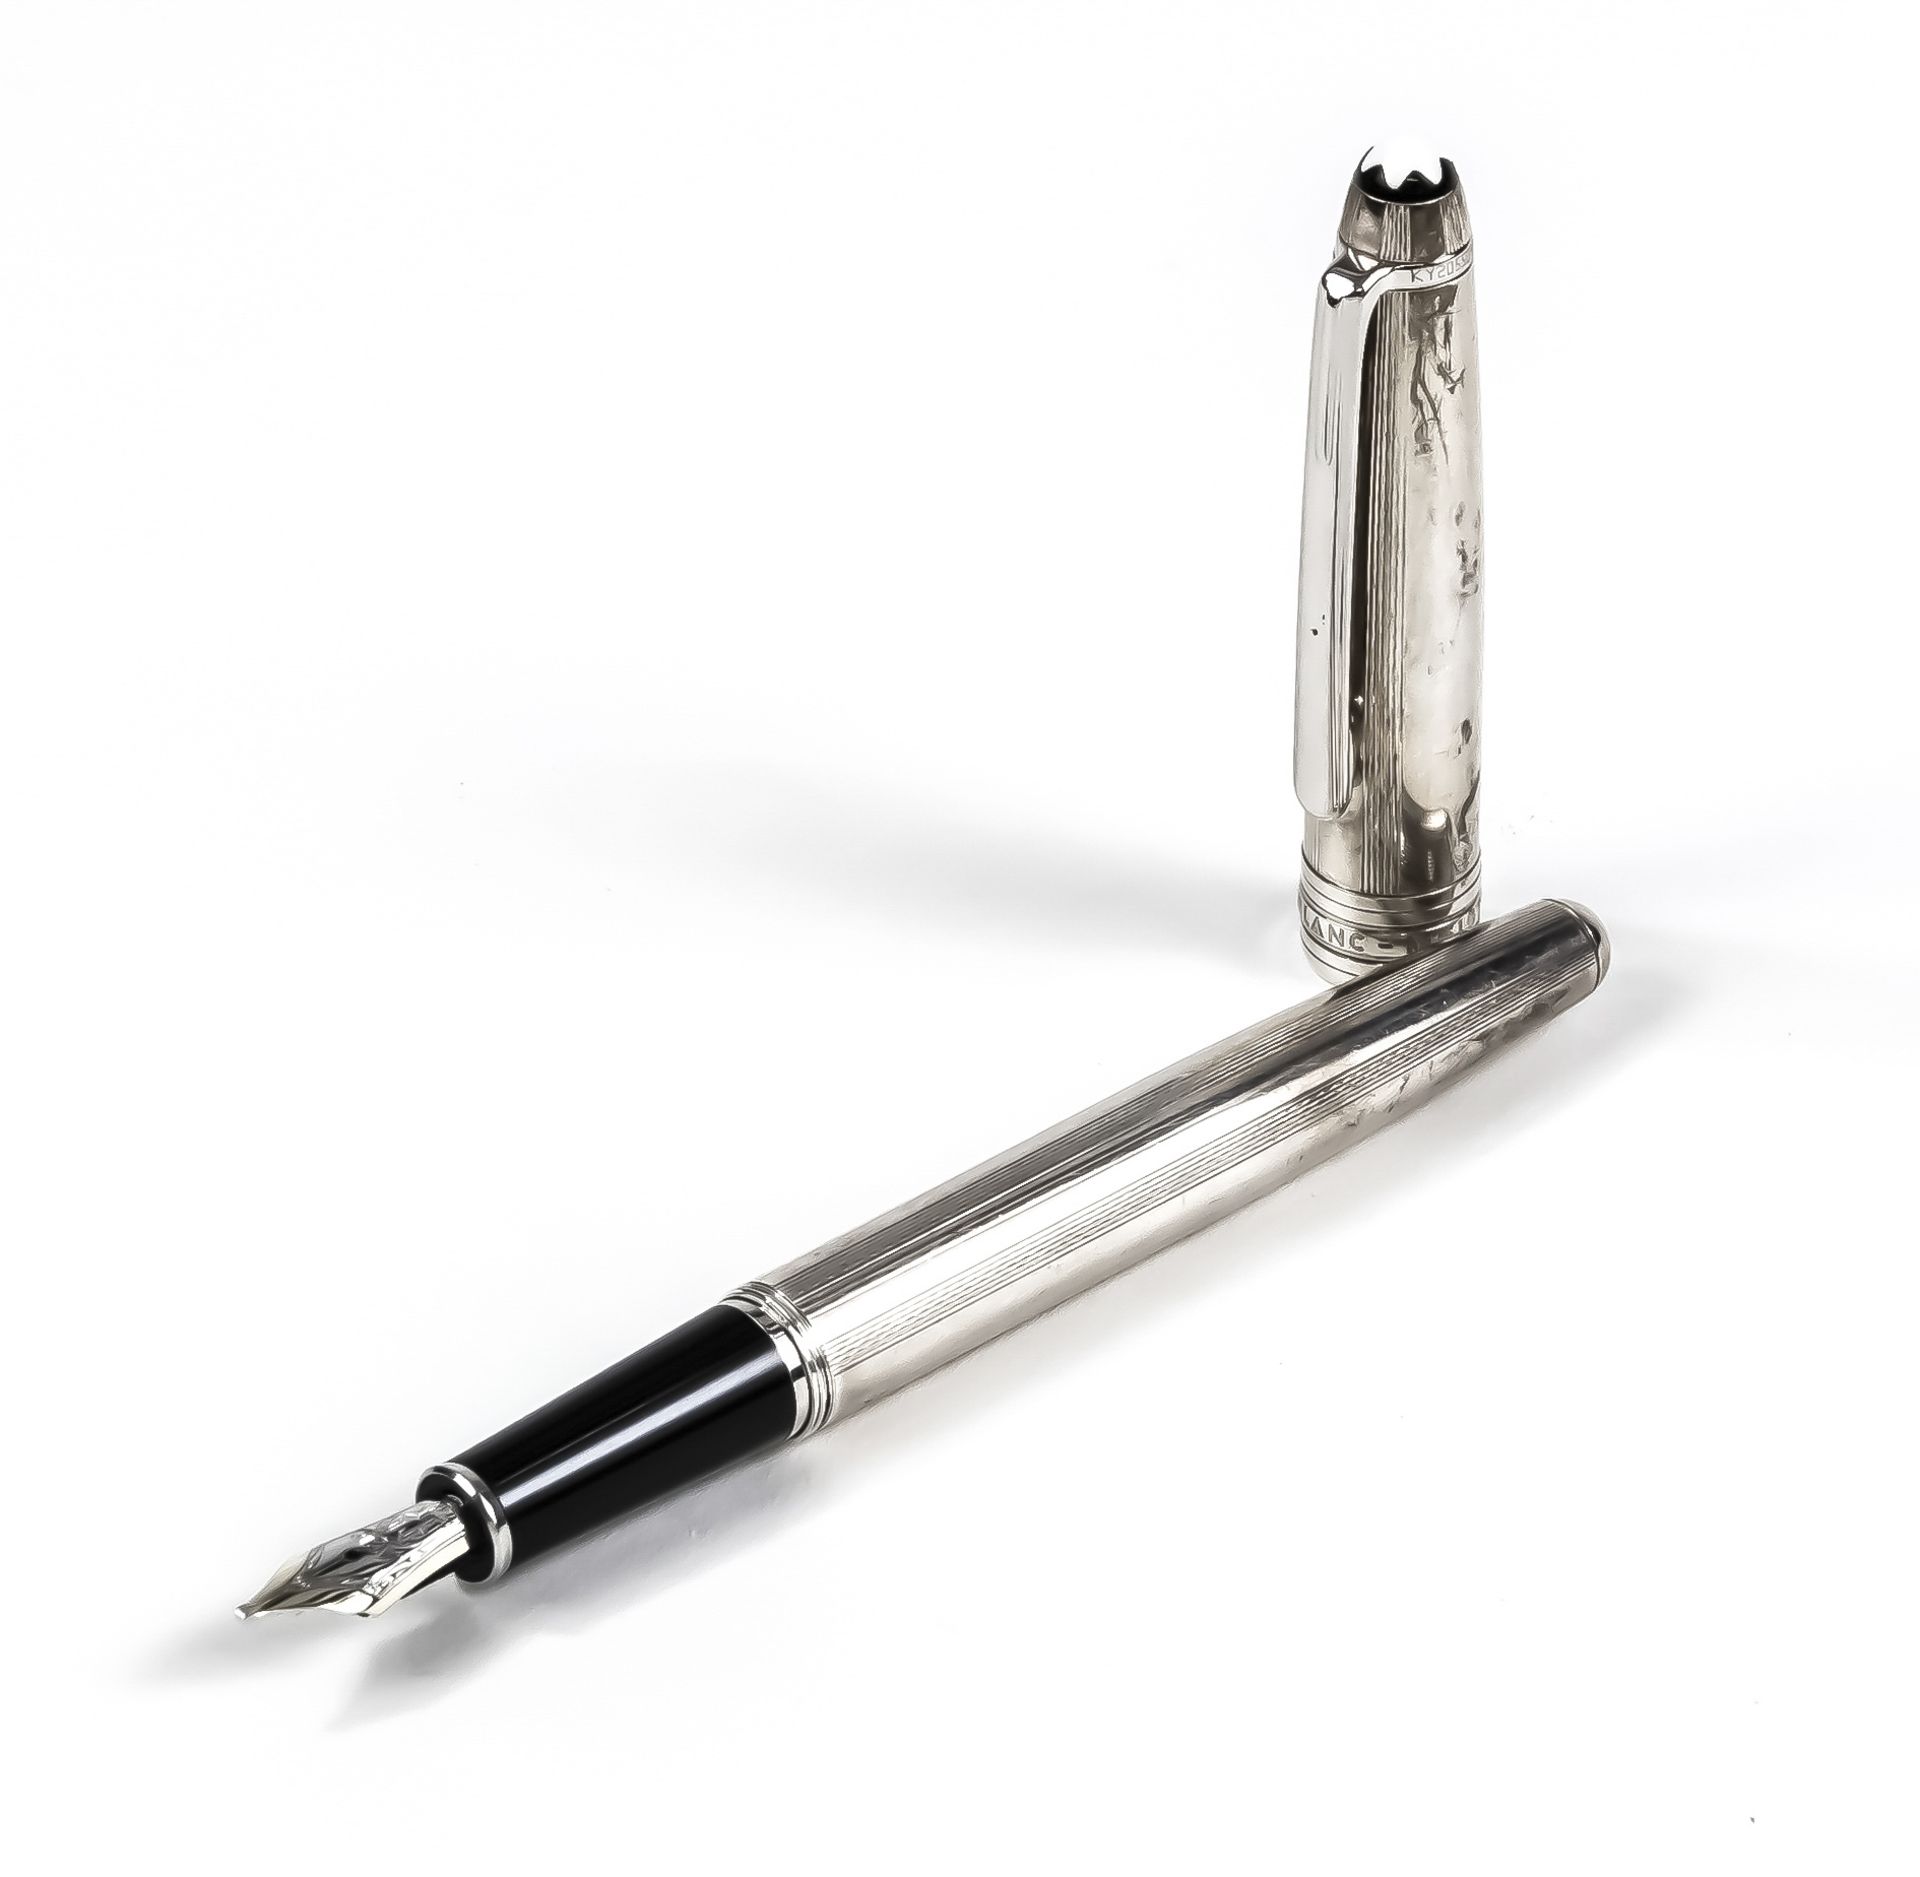 Montblanc Meisterstück cartridge fountain pen, 2nd h. 20th c., 18 ct (750) yellow gold/white gold